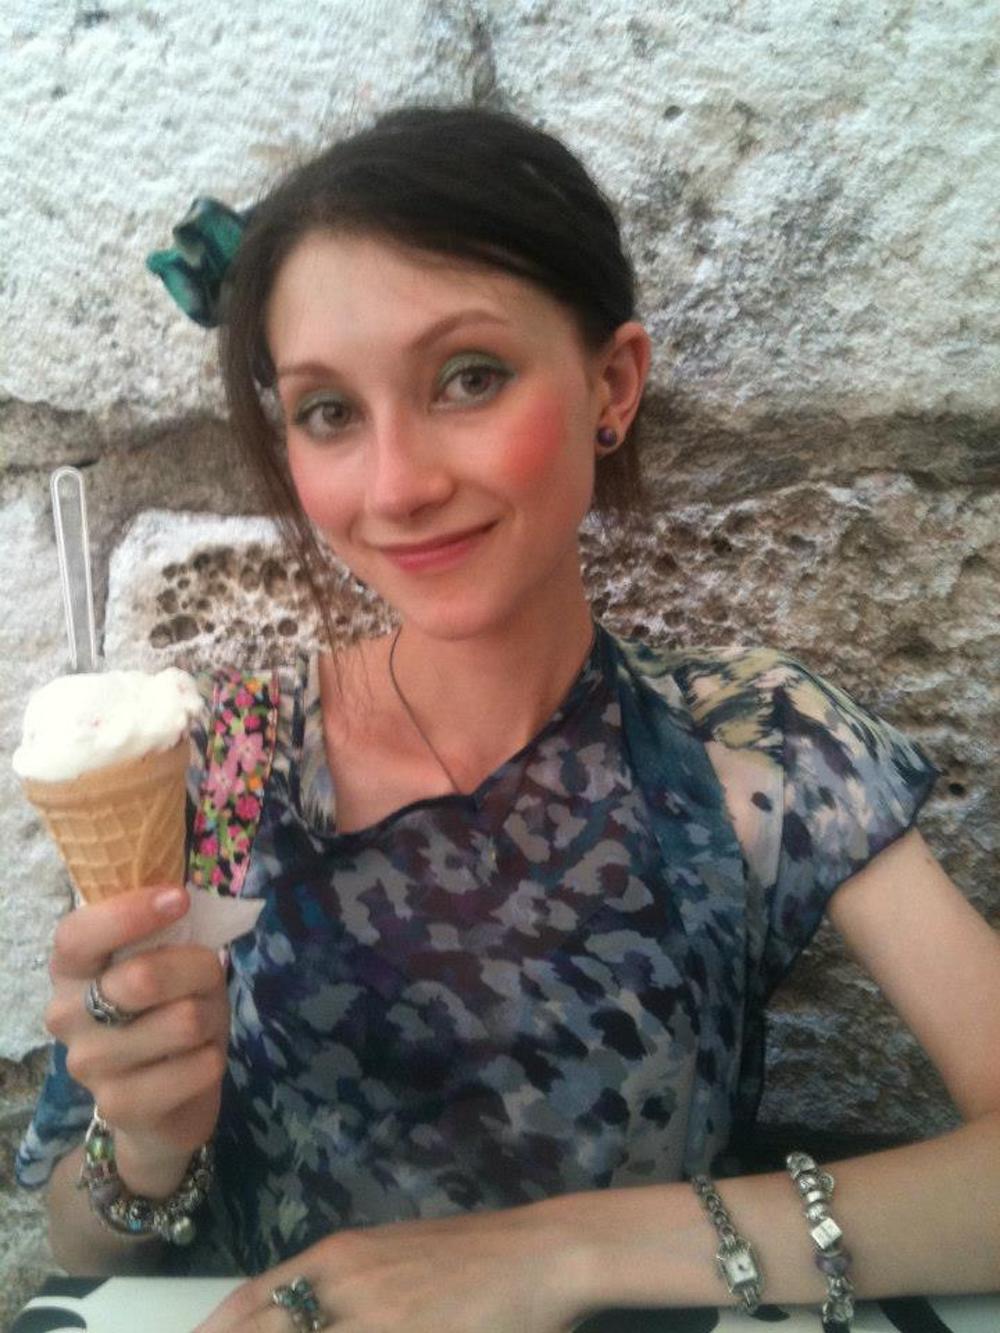 This is photo of Marissa holding an ice cream 